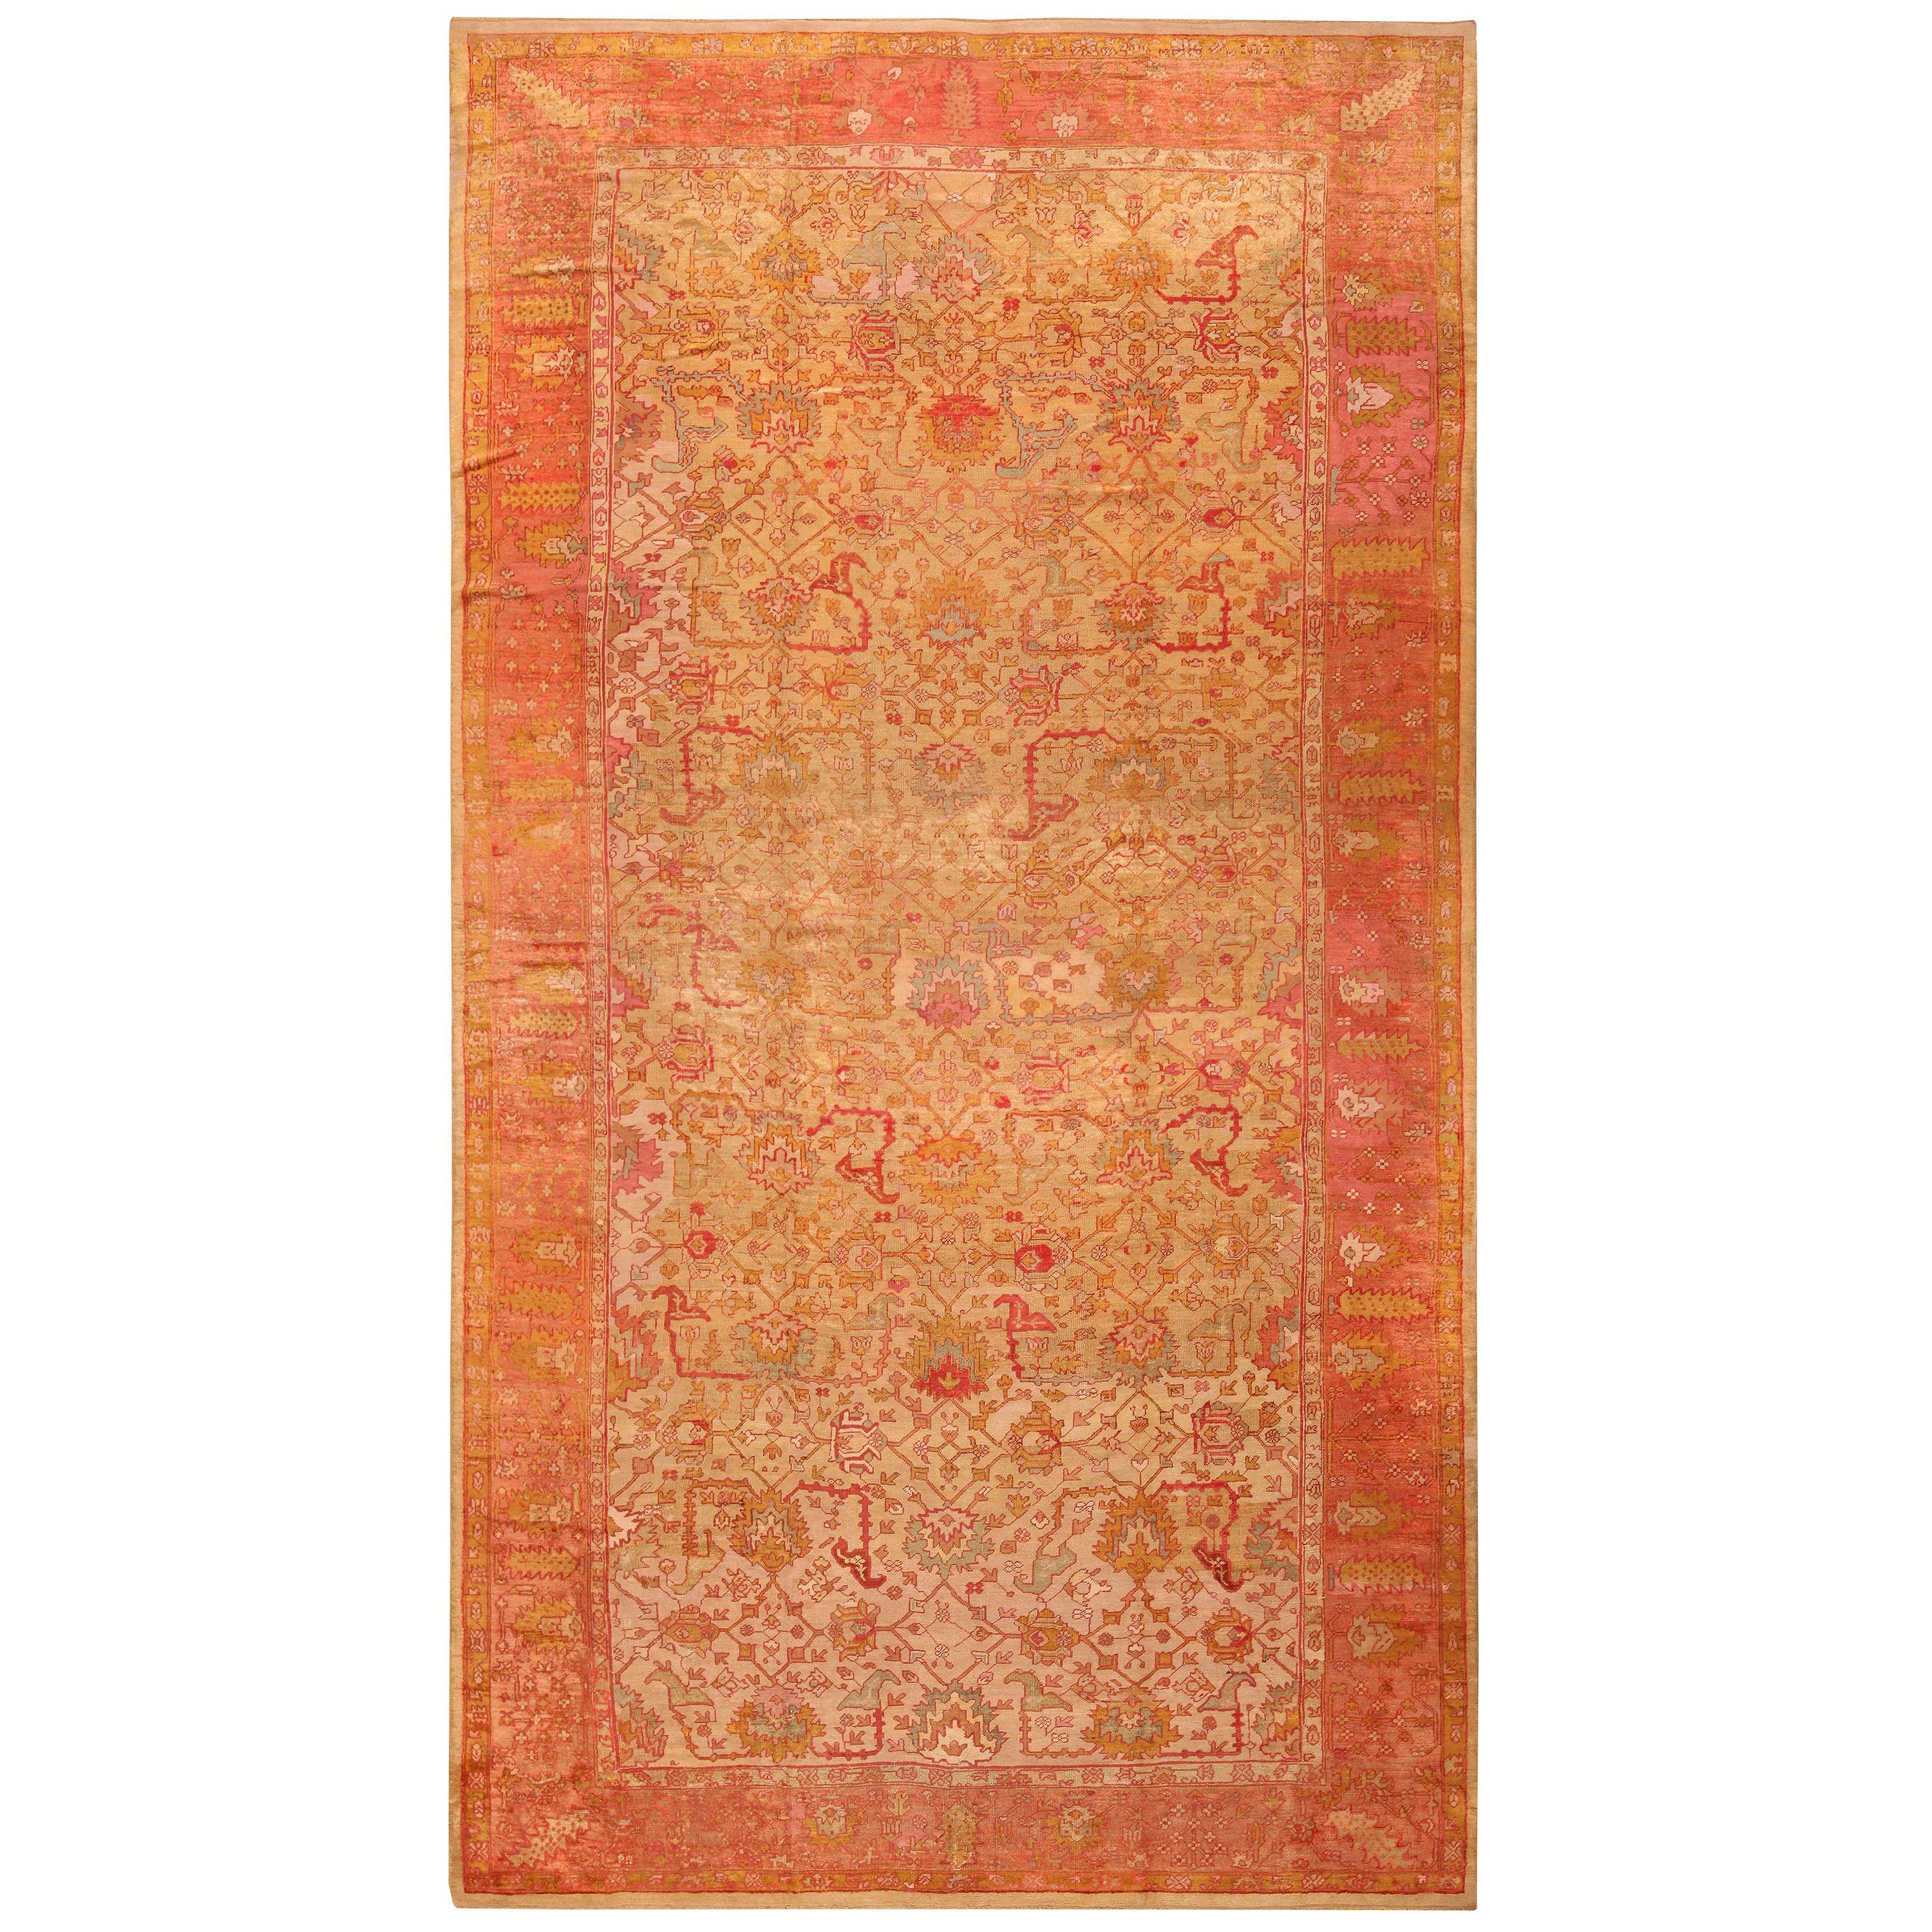 Shabby Chic Antique Silk Turkish Kayseri Rug. Size: 9 ft x 12 ft 6 in ...